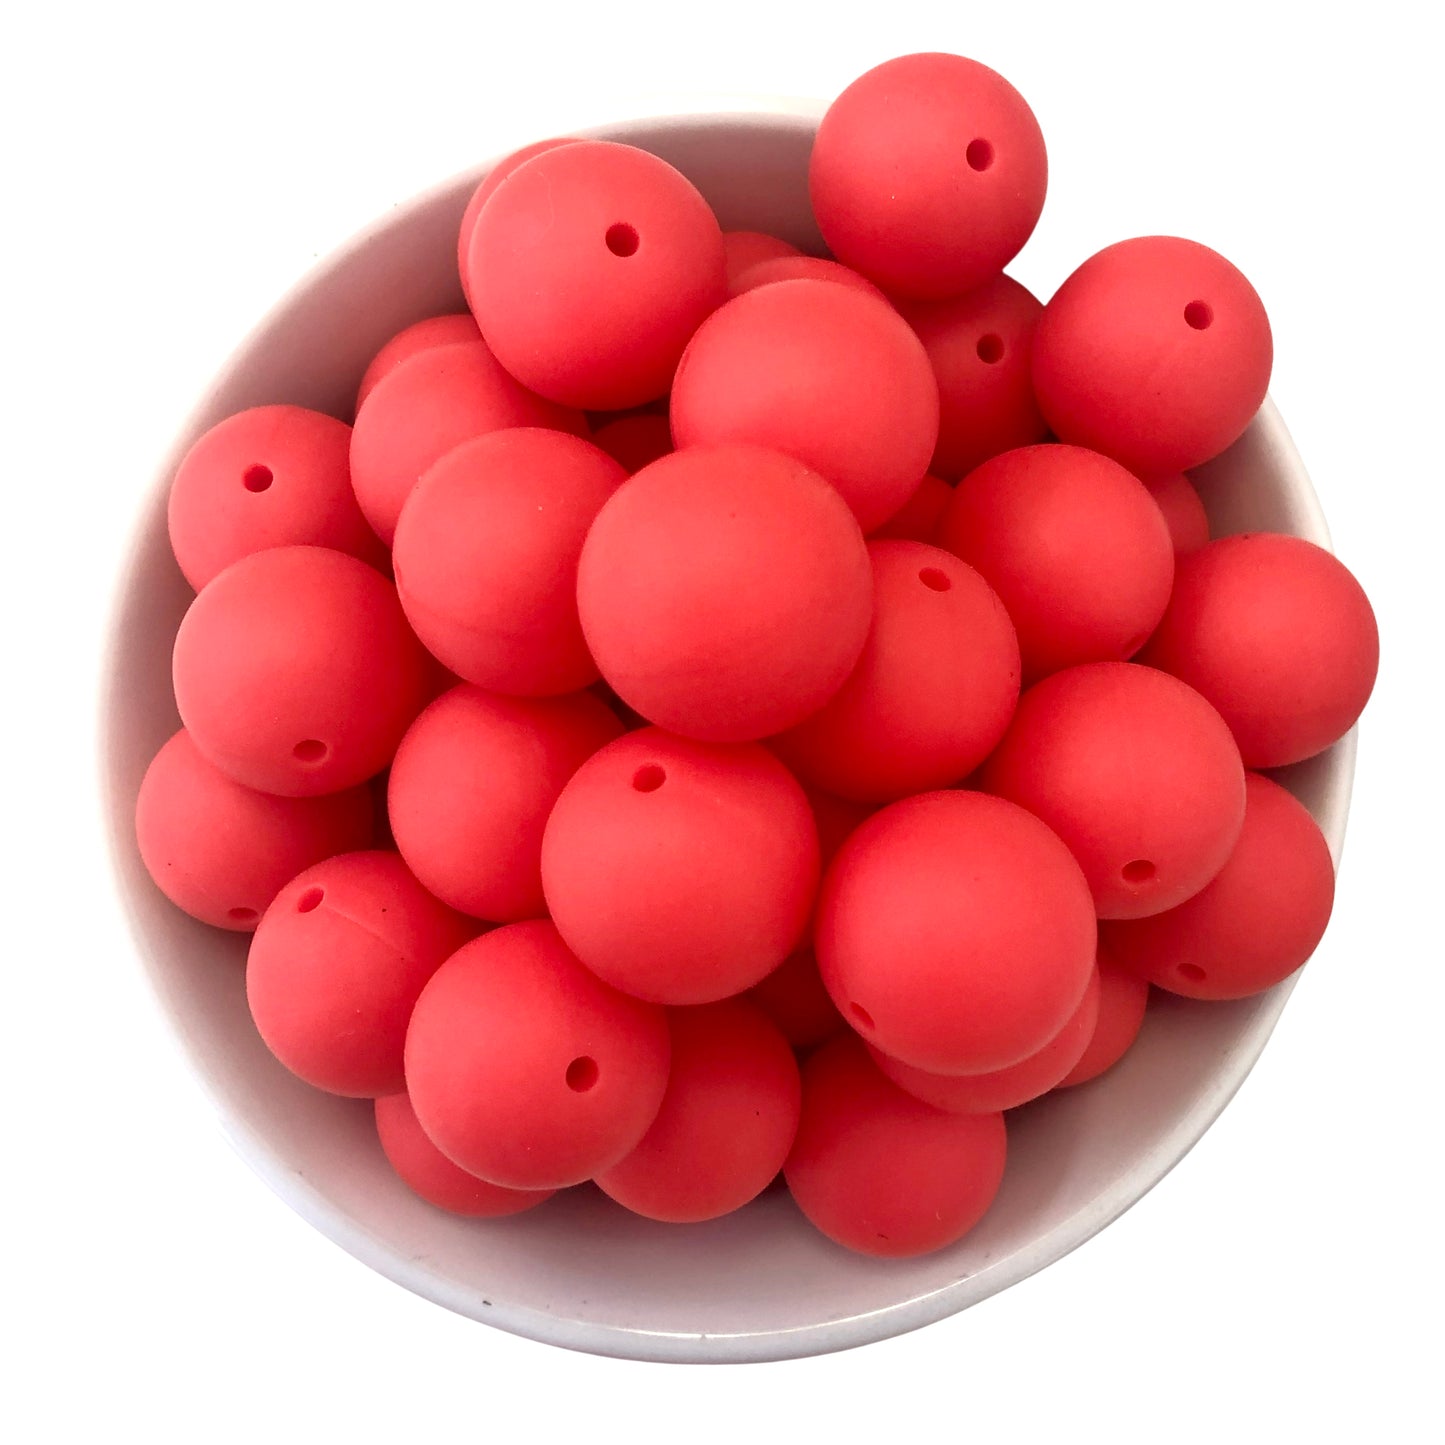 Happy Heart 19mm Silicone Beads - 5 pk.